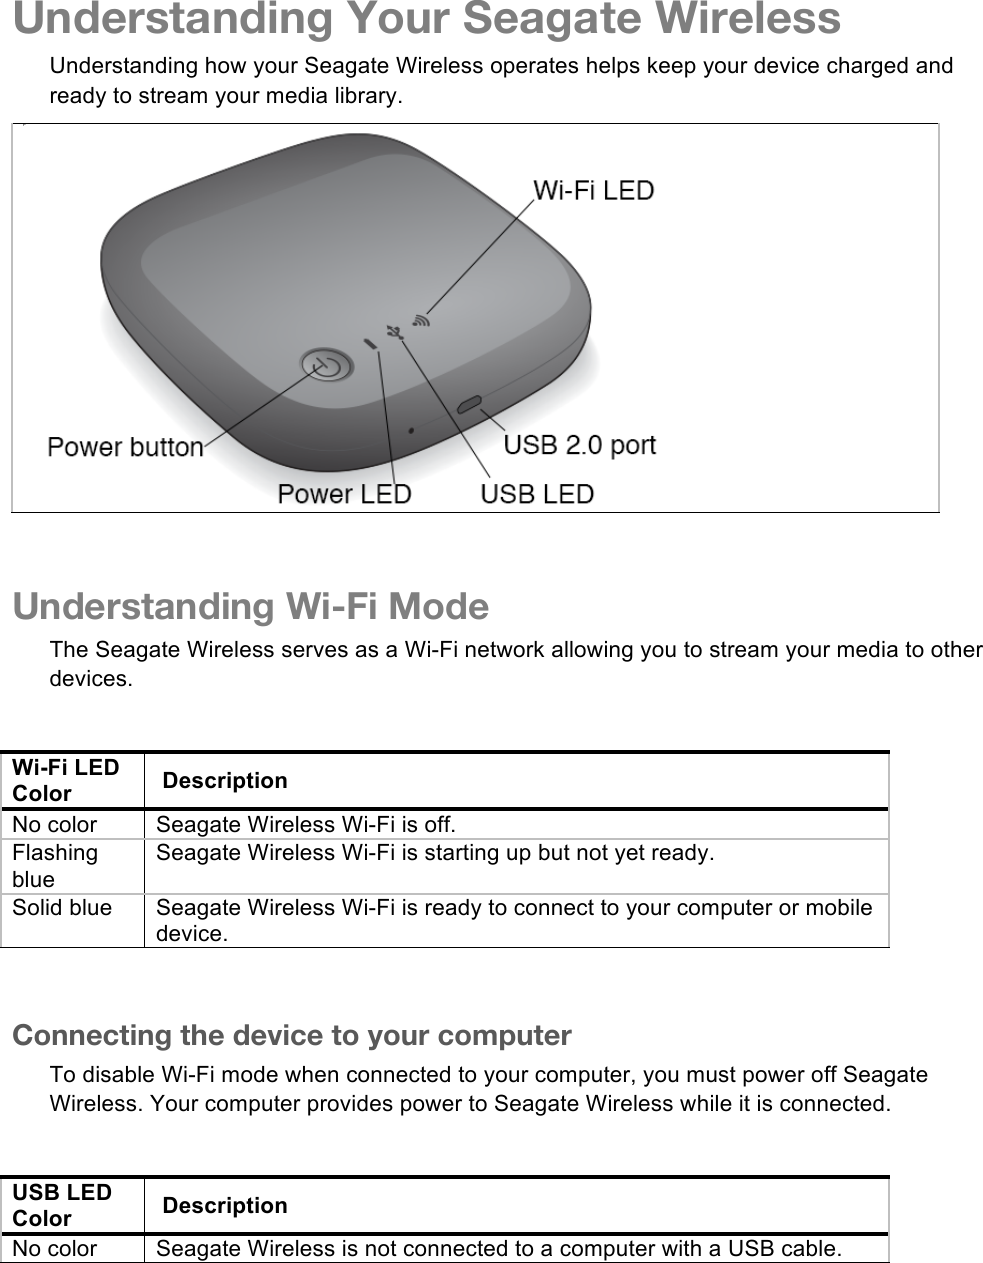 Understanding Your Seagate Wireless Understanding how your Seagate Wireless operates helps keep your device charged and ready to stream your media library. P   Understanding Wi-Fi Mode The Seagate Wireless serves as a Wi-Fi network allowing you to stream your media to other devices.    Wi-Fi LED Color  Description No color Seagate Wireless Wi-Fi is off. Flashing blue Seagate Wireless Wi-Fi is starting up but not yet ready. Solid blue Seagate Wireless Wi-Fi is ready to connect to your computer or mobile device.  Connecting the device to your computer To disable Wi-Fi mode when connected to your computer, you must power off Seagate Wireless. Your computer provides power to Seagate Wireless while it is connected.  USB LED Color  Description No color Seagate Wireless is not connected to a computer with a USB cable. 